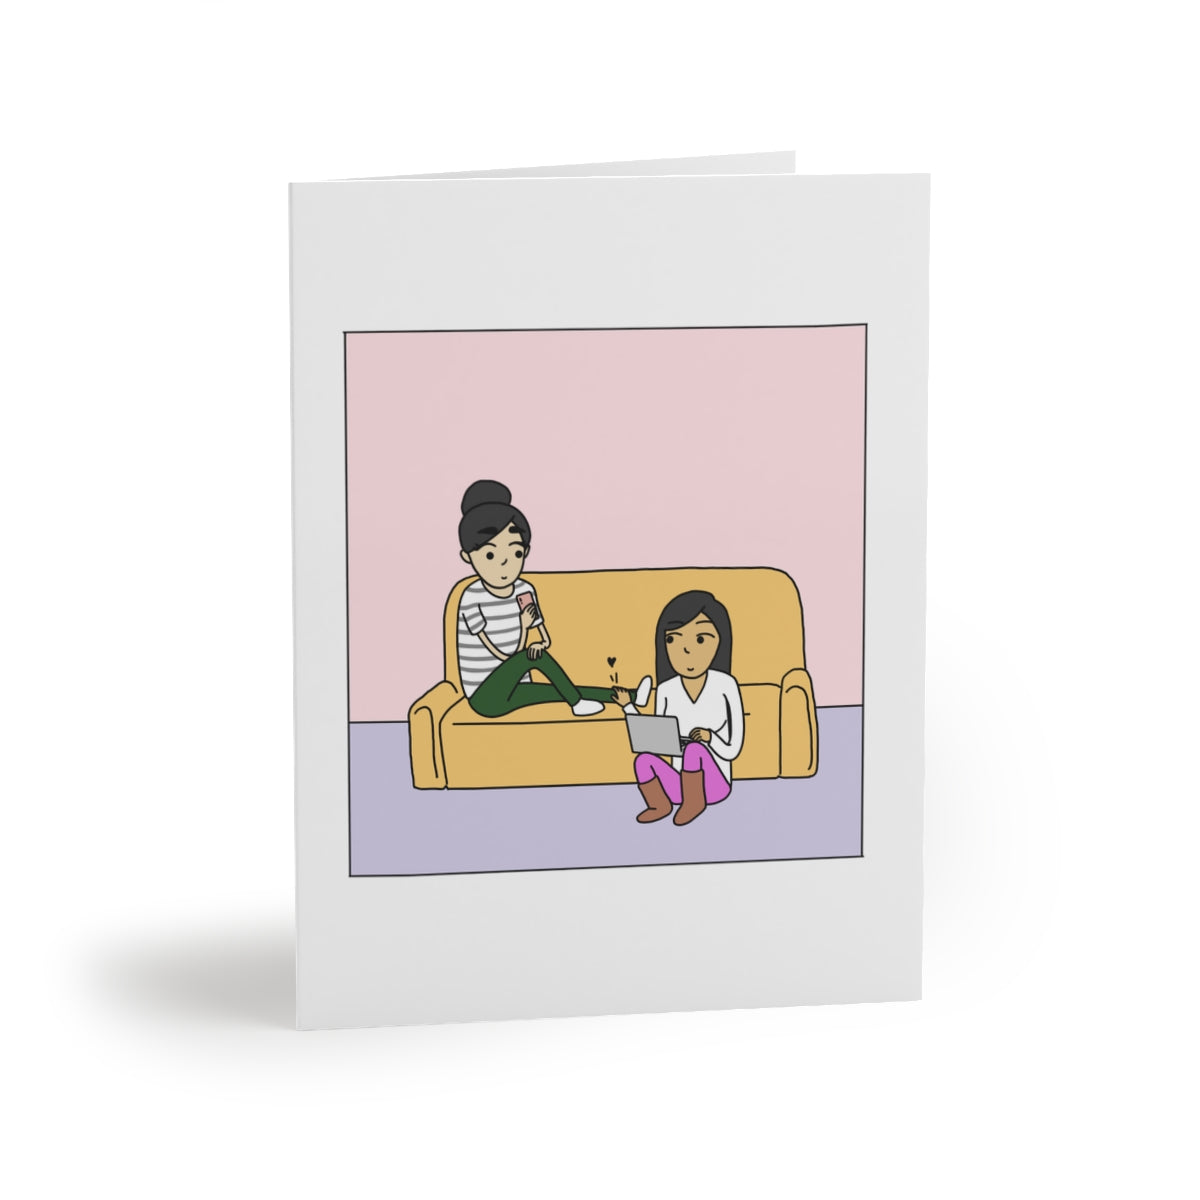 You Still Give Me Butterflies | Lesbian Valentine's Day Card | LGBTQ Greeting Card